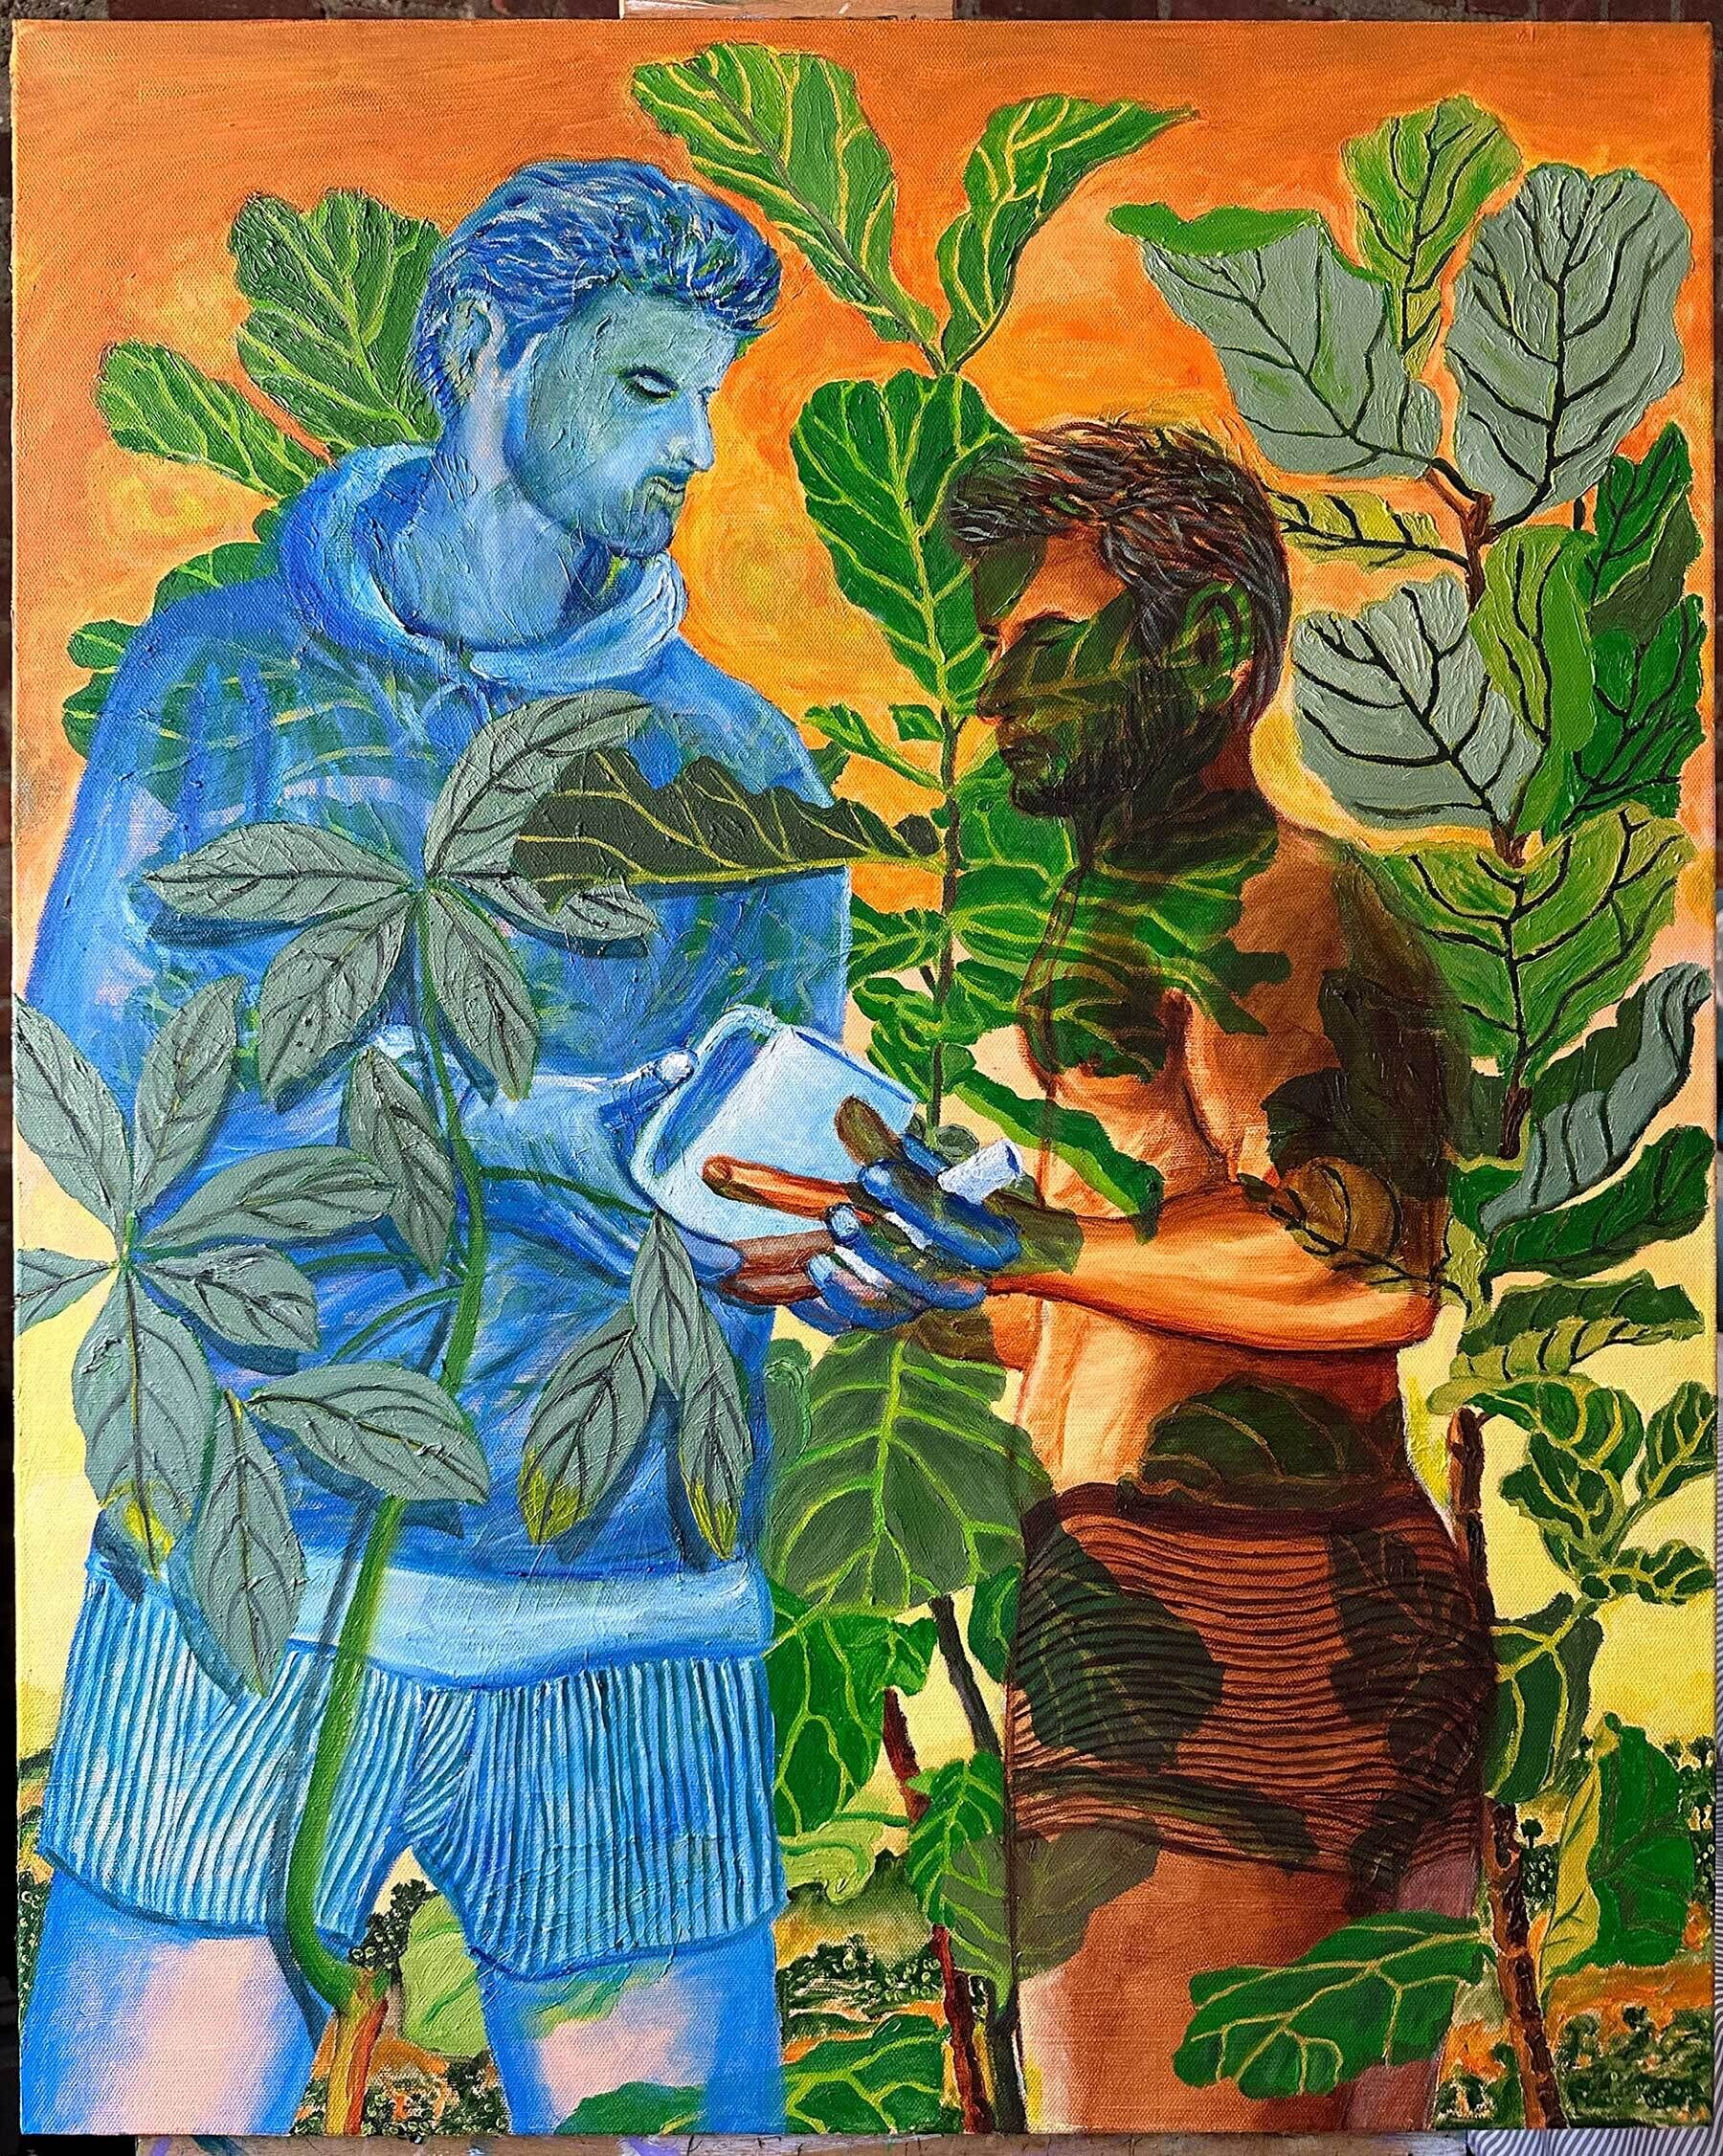 Two figures, one blue and one brown, stand amidst lush green foliage, holding a white object, with an orange sky in the background.